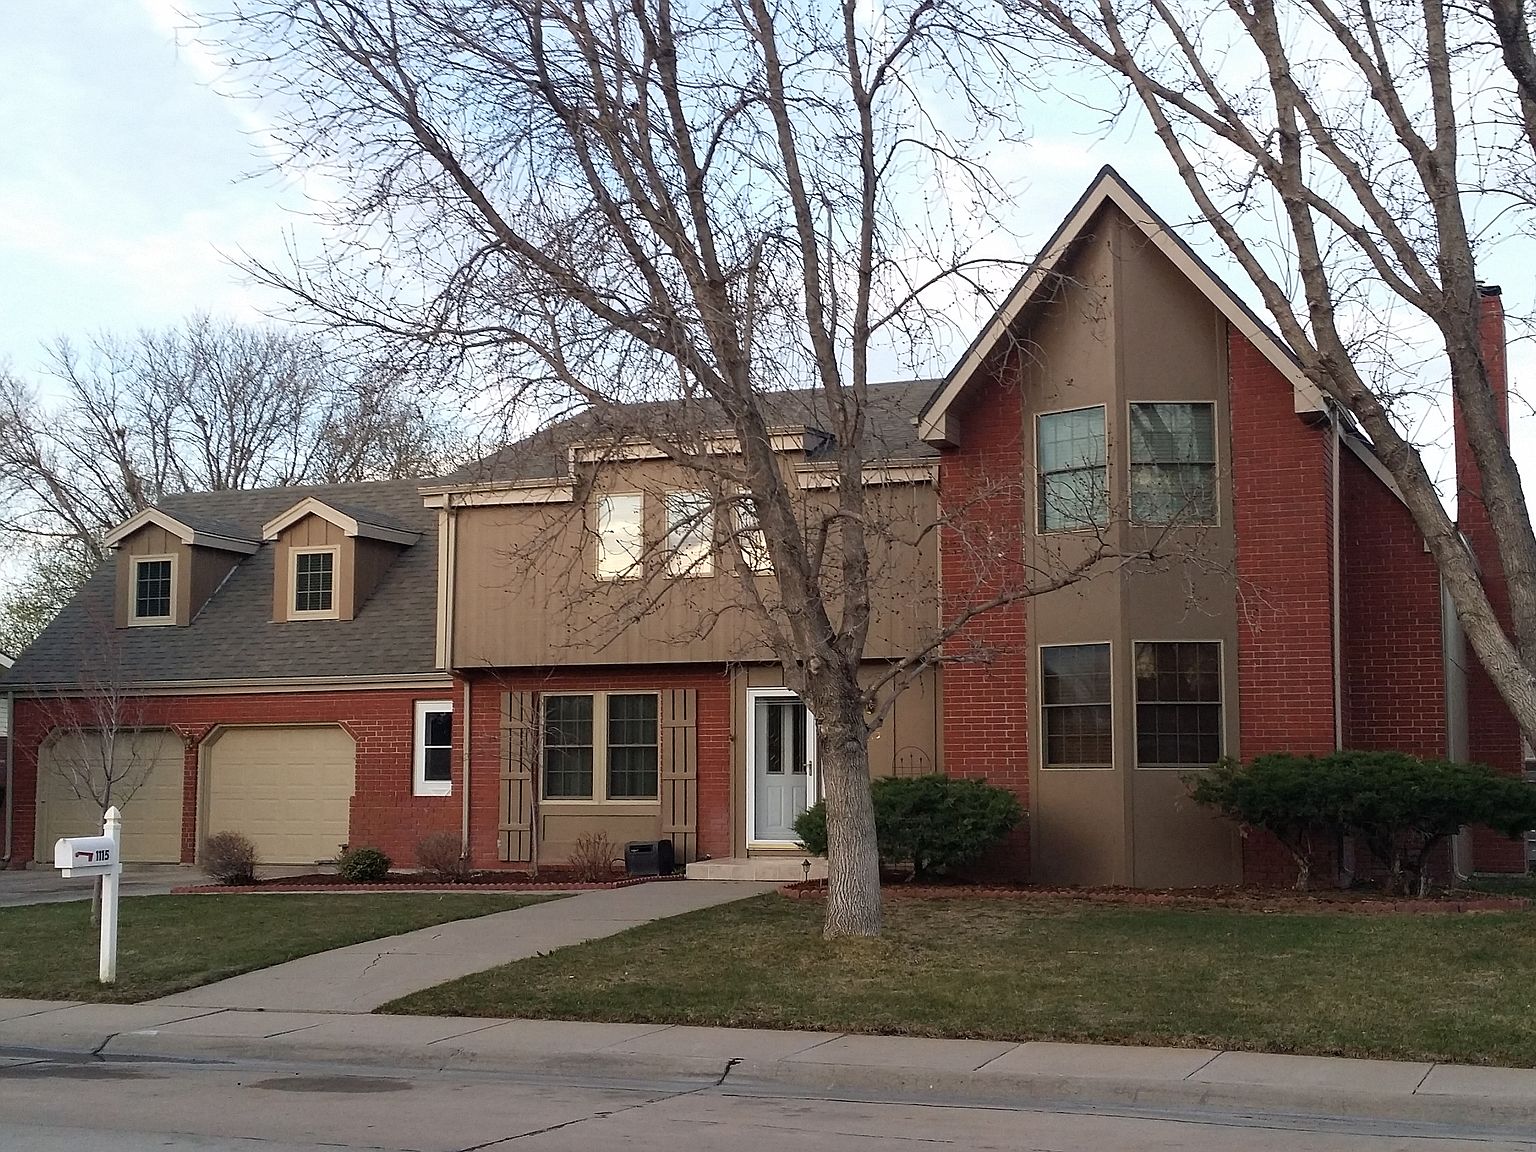 Homes for sale madison wi